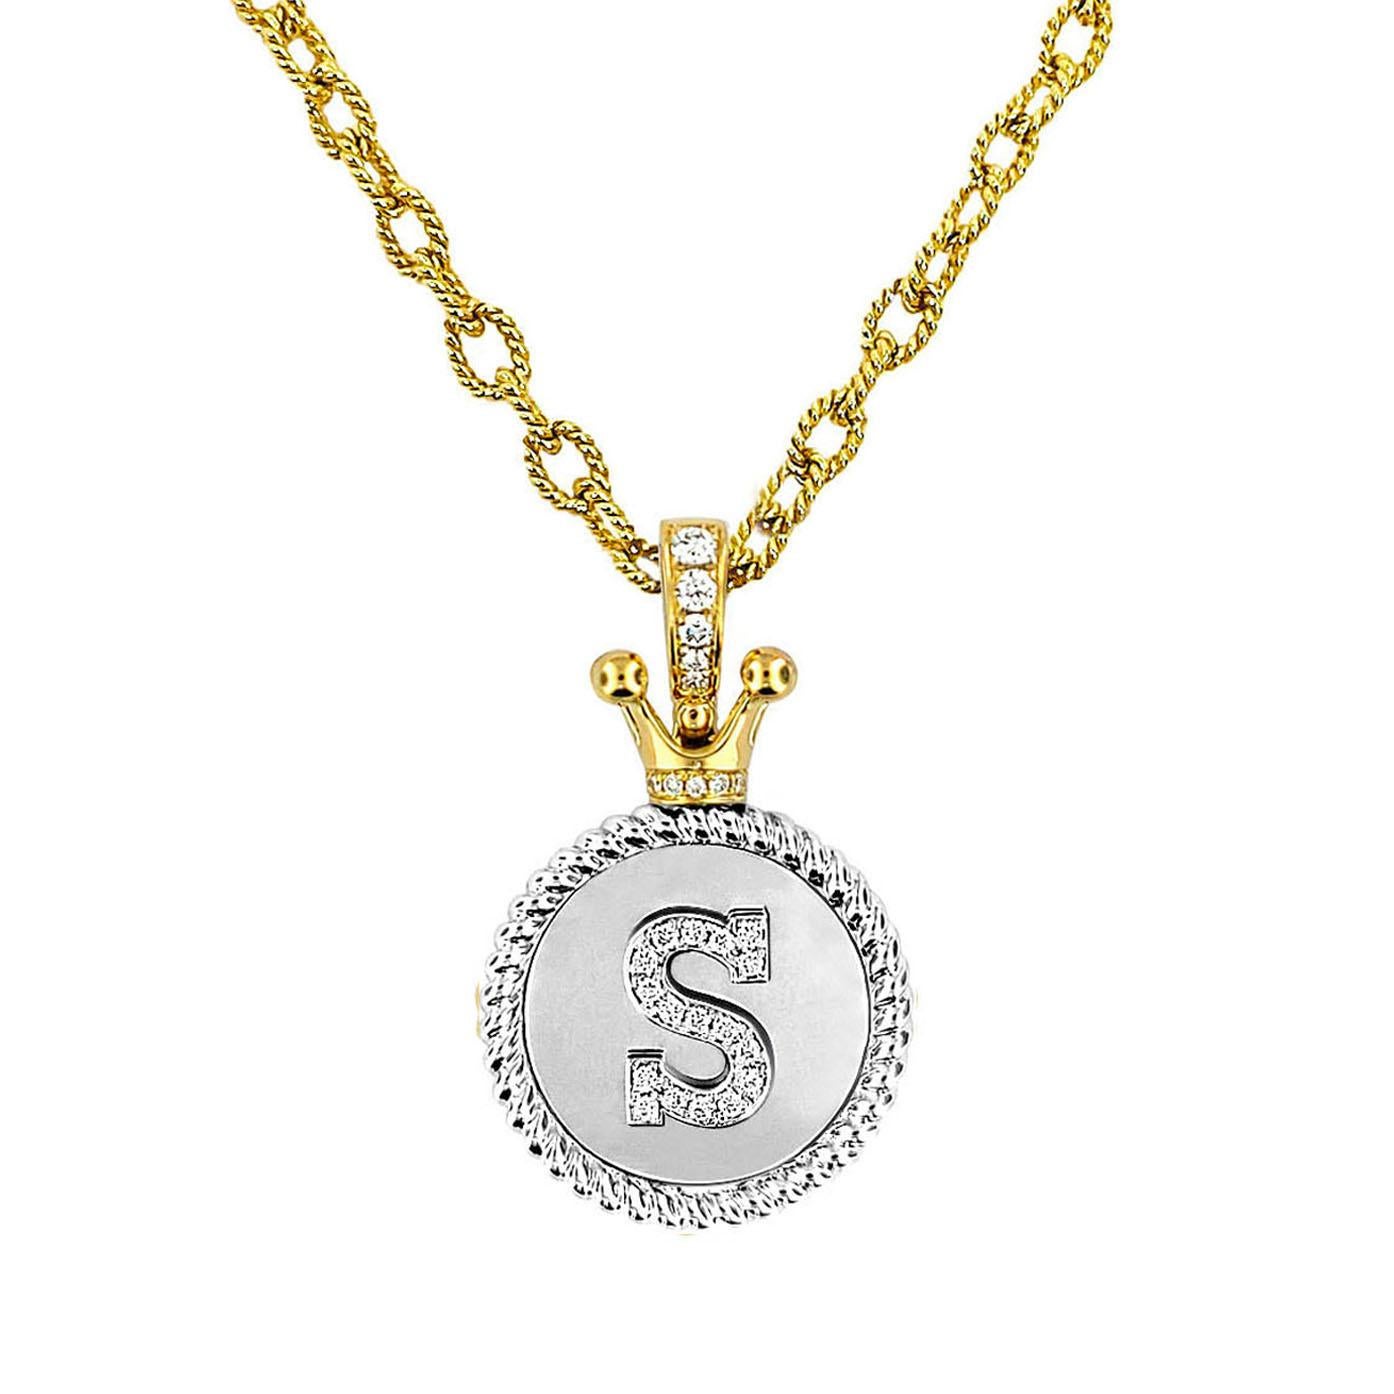 Produced by award winning Italian designer Stefano Vitolo. Stefano creates custom artisanal one-of-a-kind jewelry with excellent gemstones in a truly old world Italian craftmanship.

Gemstone: Diamonds 0.21 ctw
Initial Rope Coin: 20 x 20 mm
Total